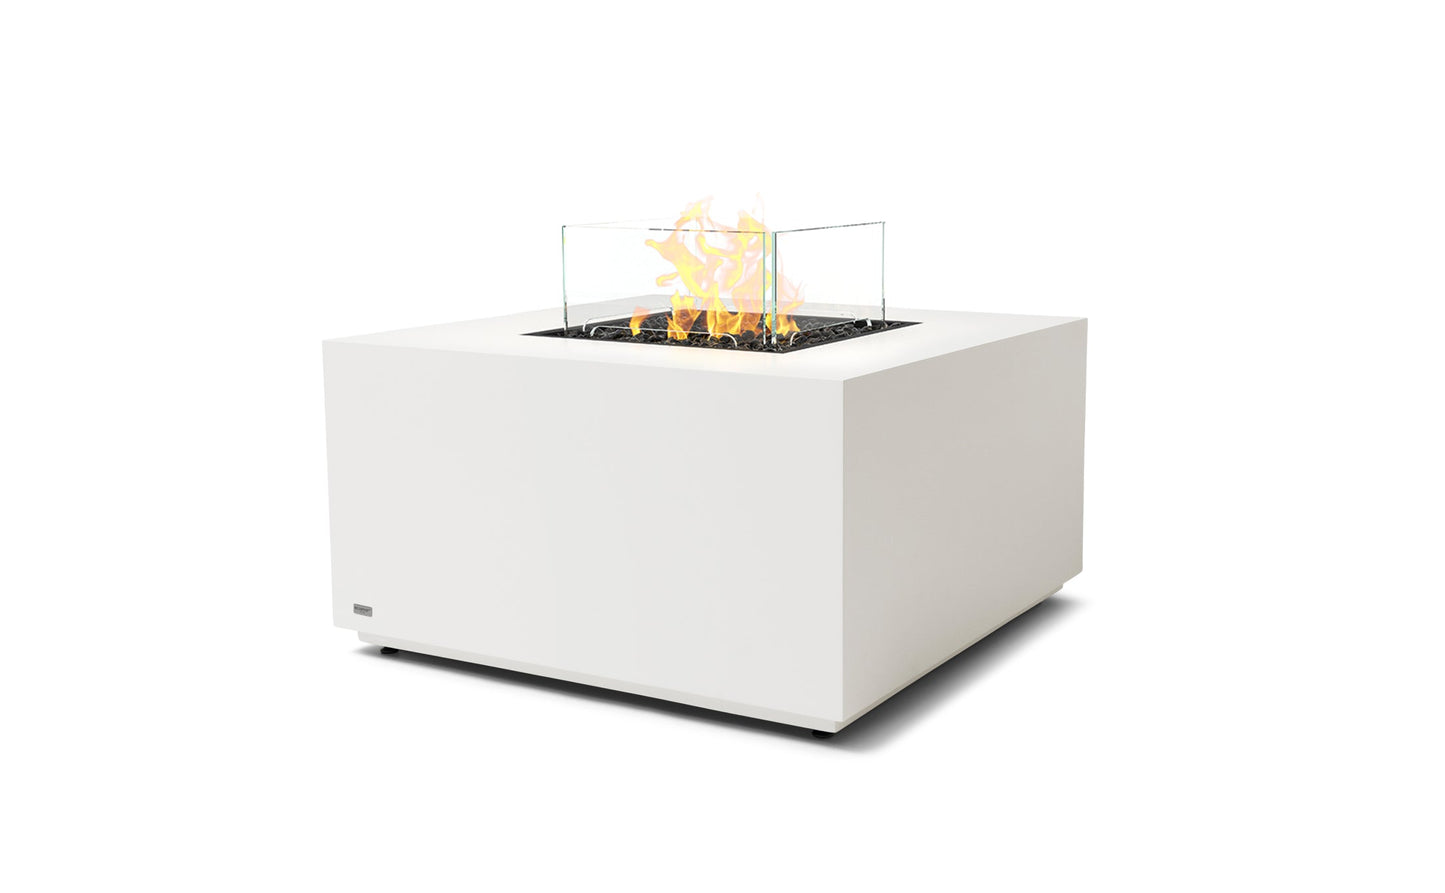 EcoSmart Fire - Chaser 38 - Gas Fire Pit Table - Bone